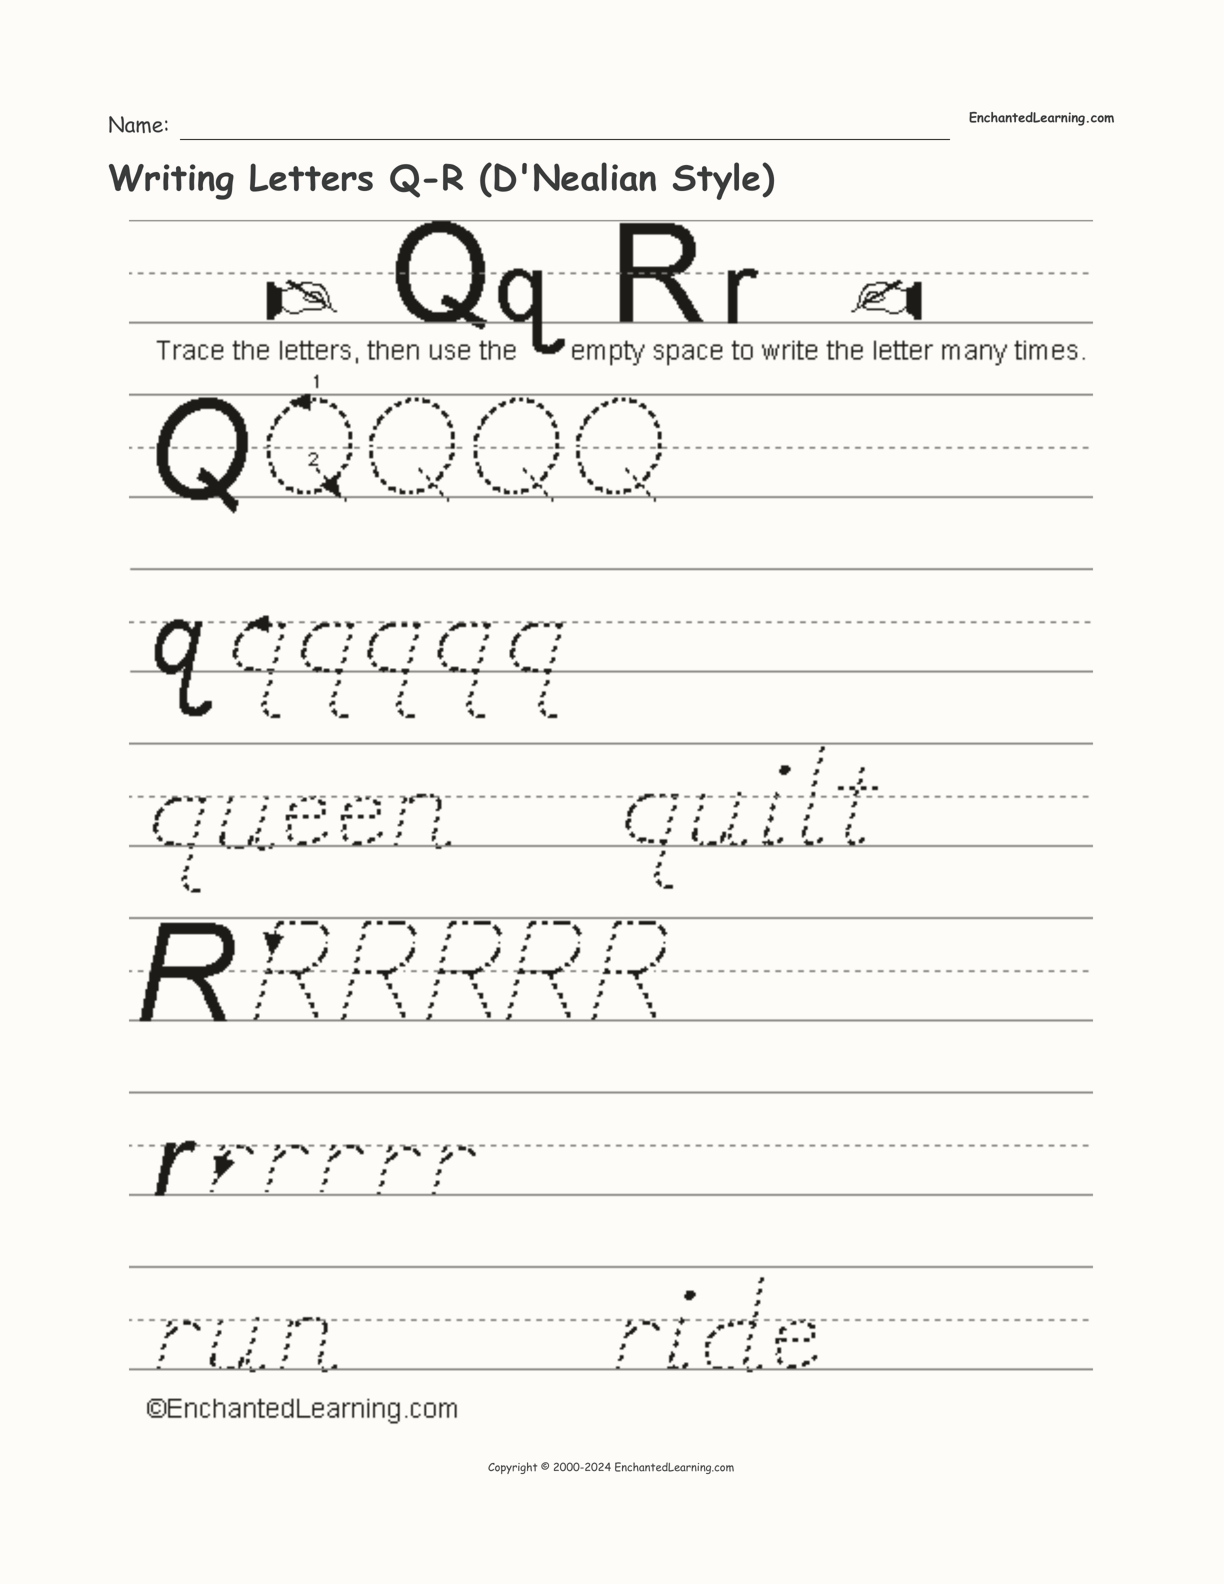 Writing Letters Q-R (D'Nealian Style) interactive worksheet page 1